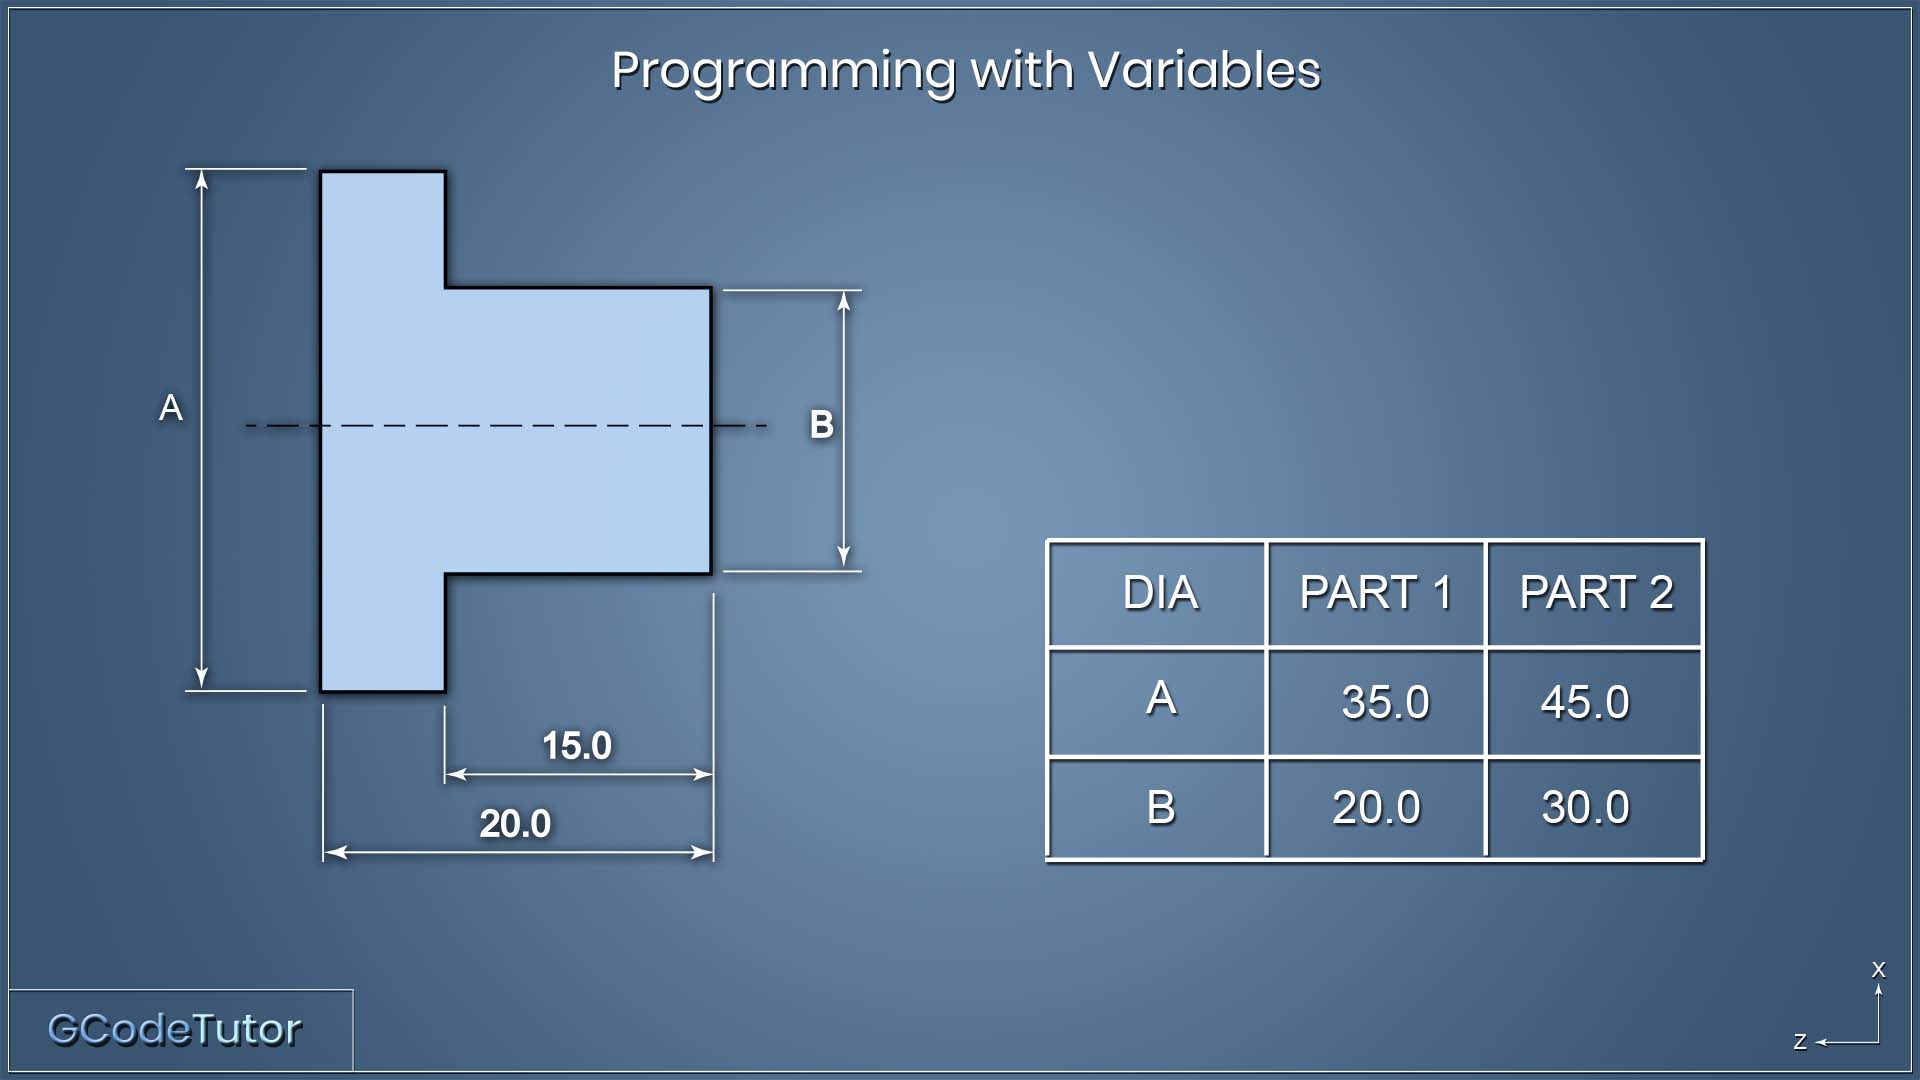 An Example of programming a CNC machine using variables